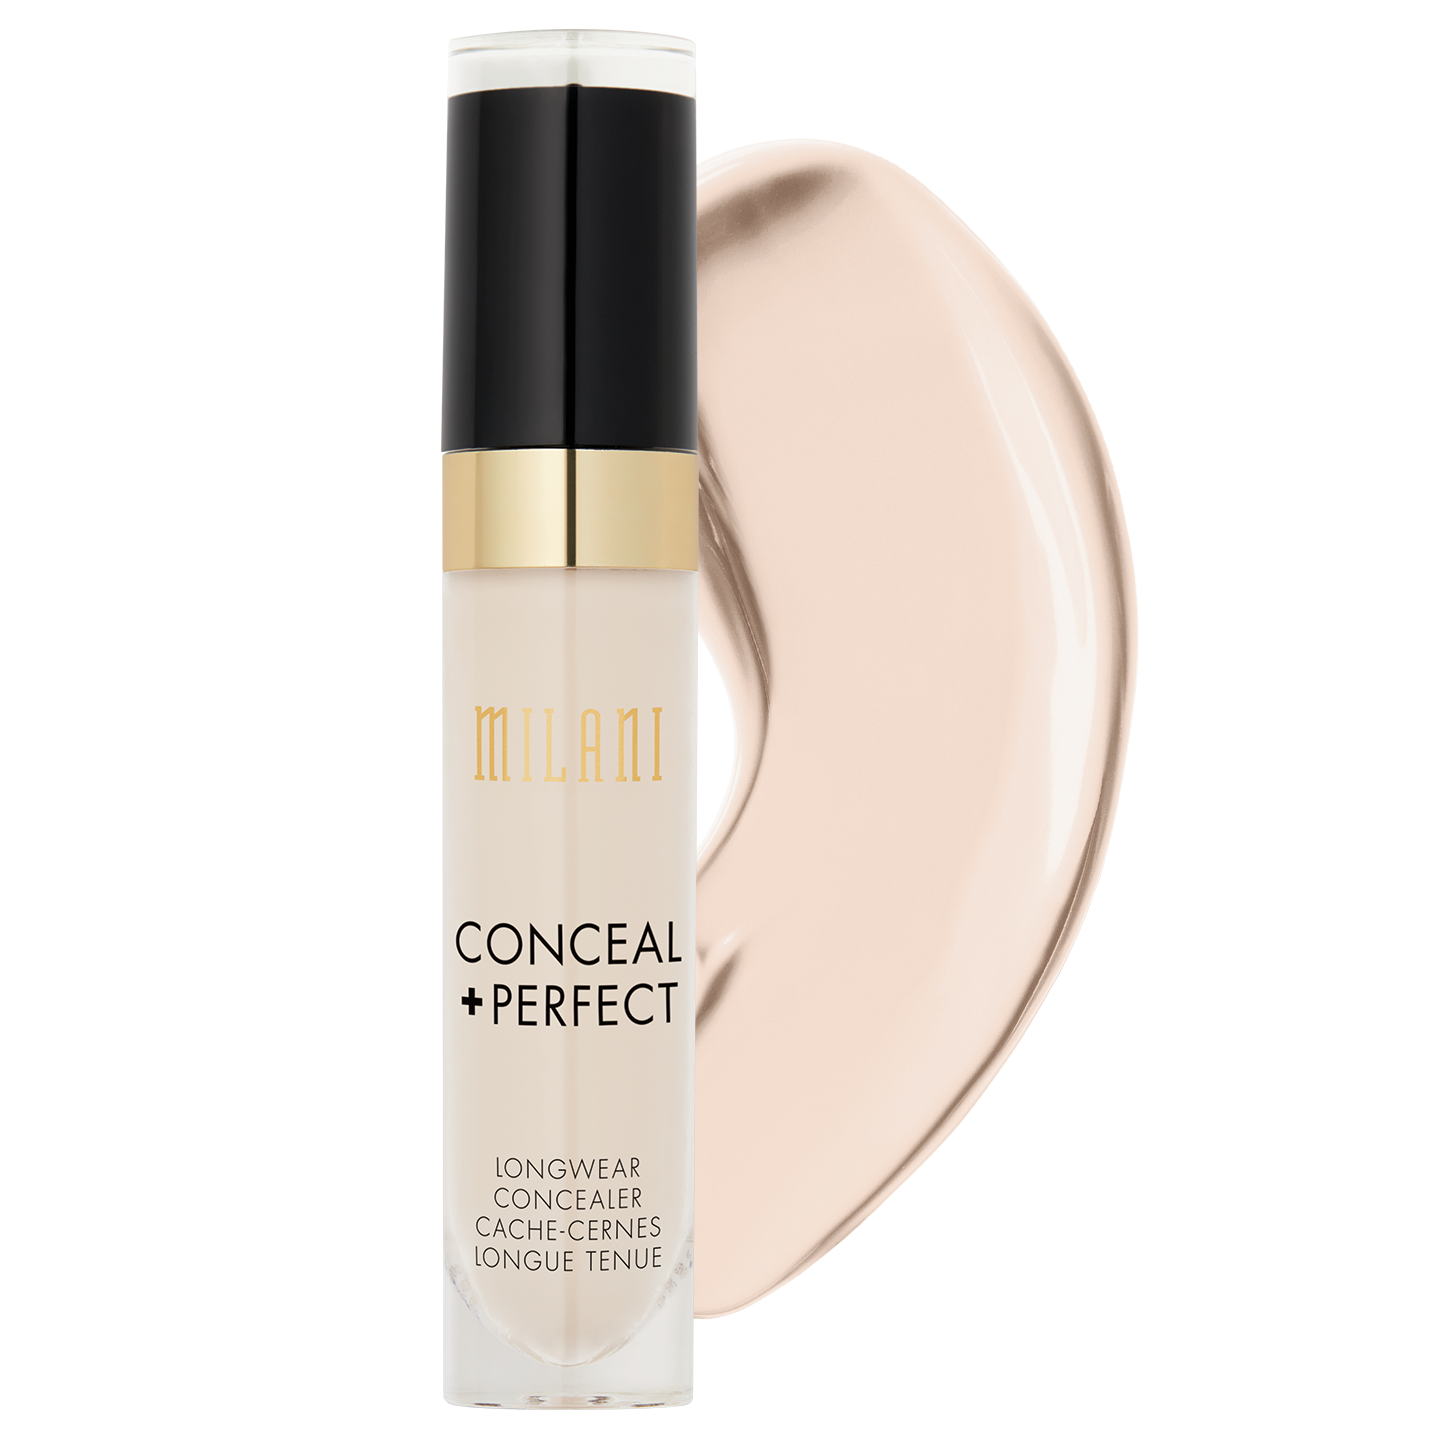 MILANI Conceal + Perfect Long-Wear Concealer - Pure Ivory #100